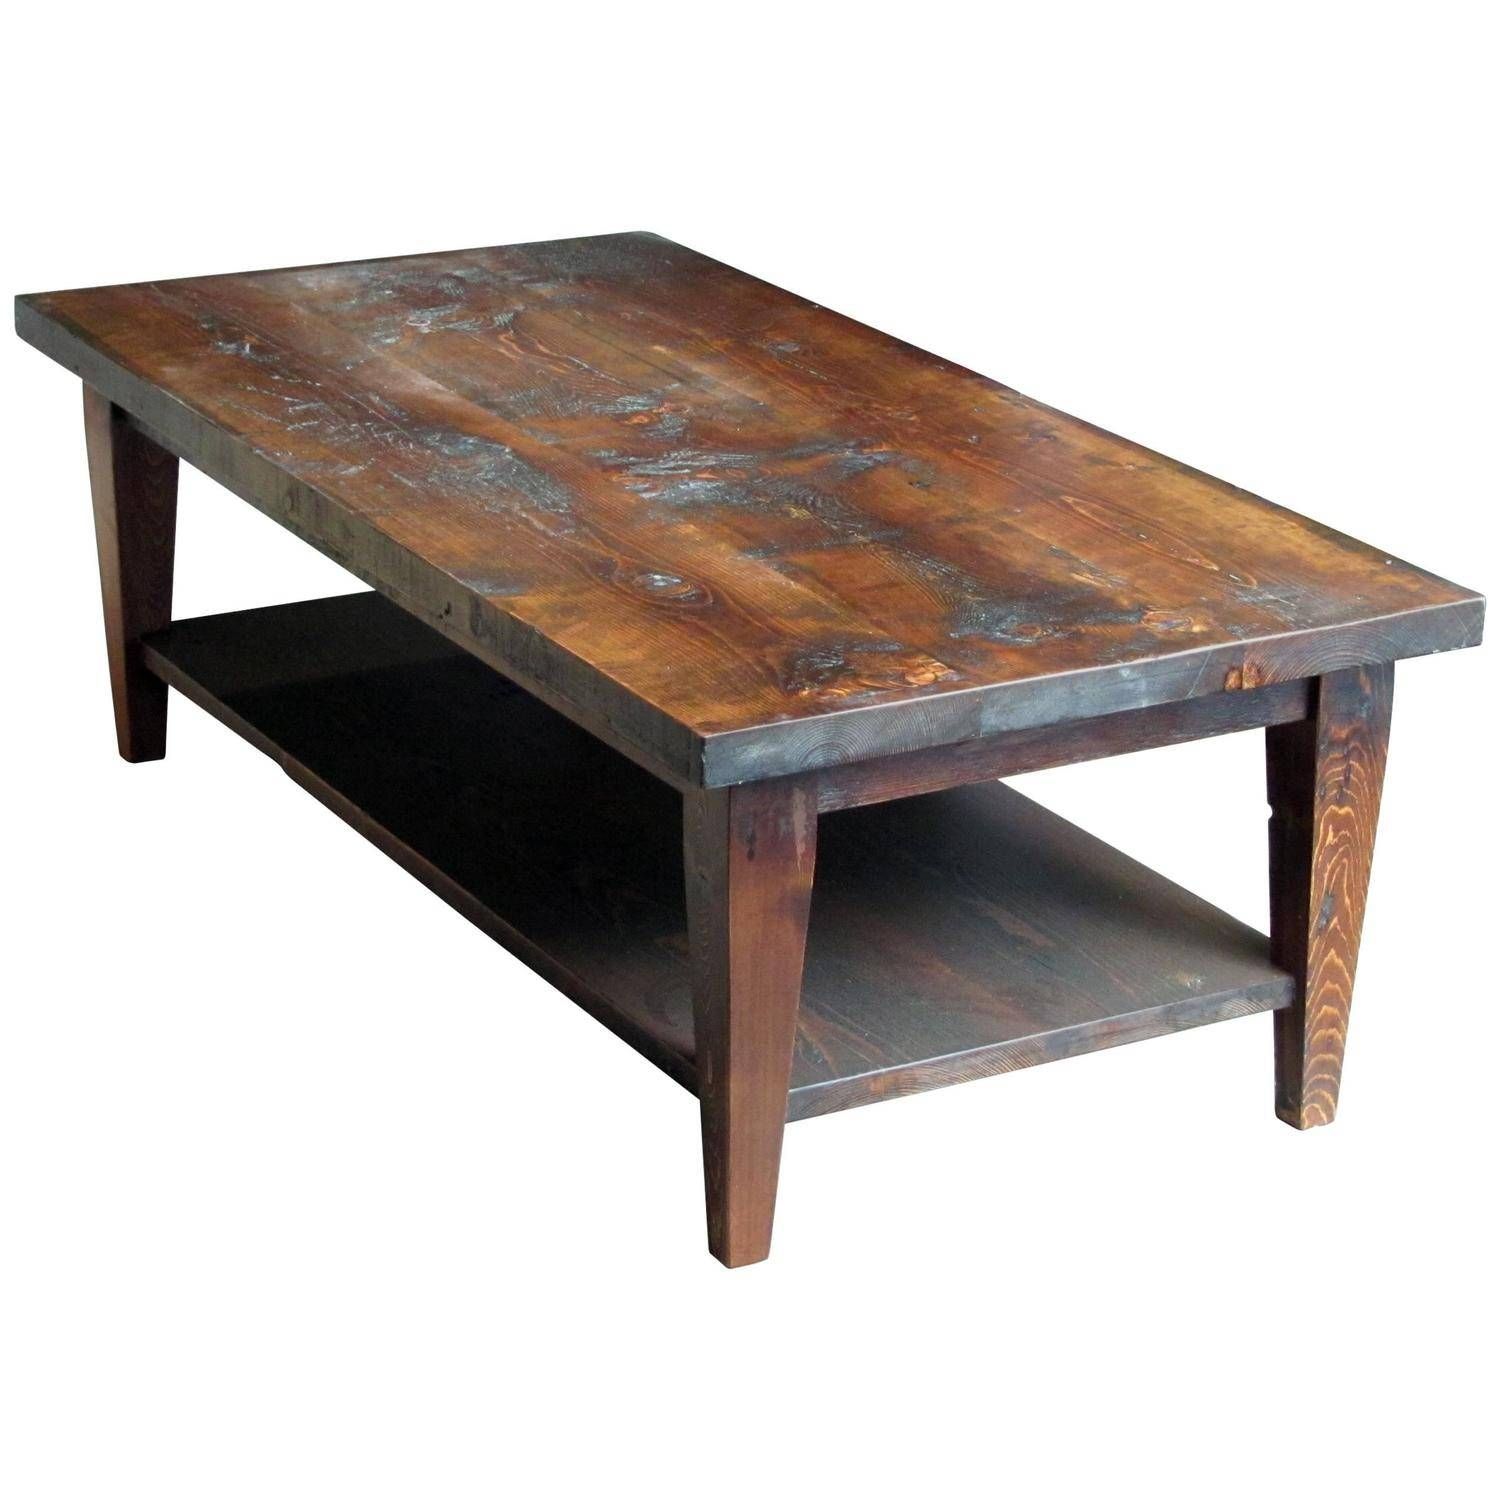 Pine Coffee And Cocktail Tables – 62 For Sale At 1stdibs Within Rustic Coffee Tables With Bottom Shelf (View 22 of 30)